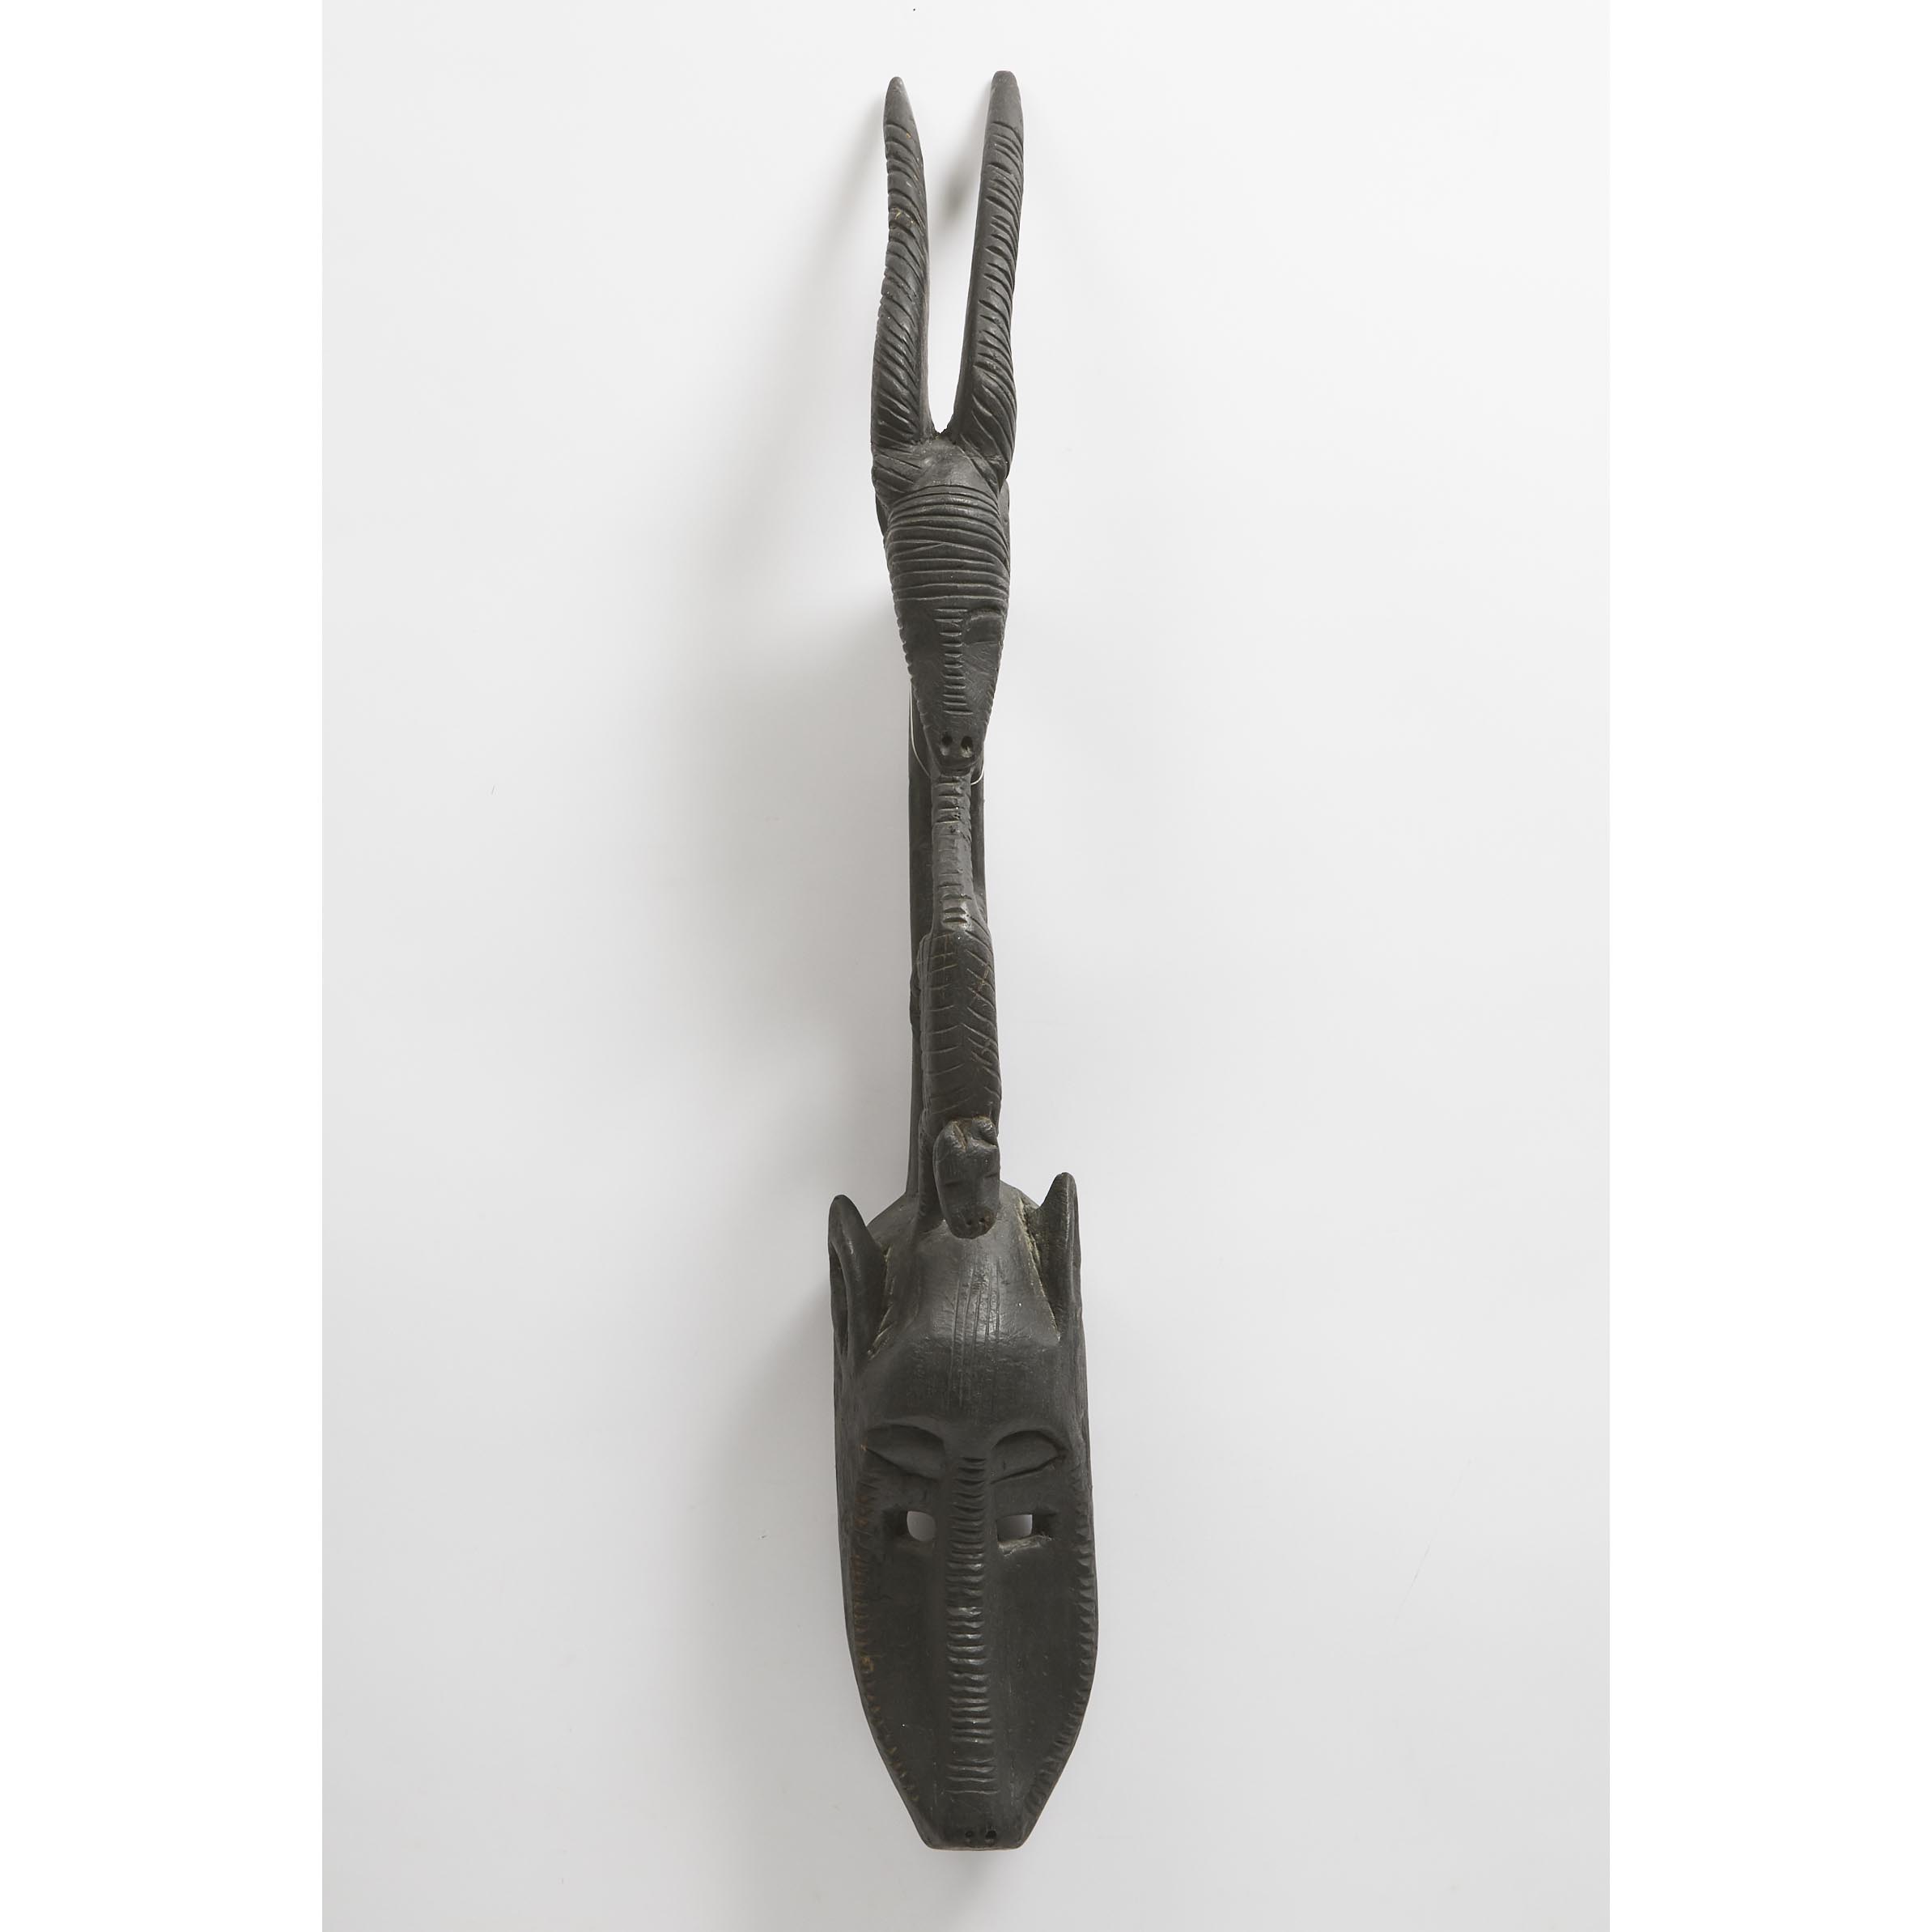 Unidentified Zoomorphic mask, possibly Mossi, West Africa, mid to late 20th century